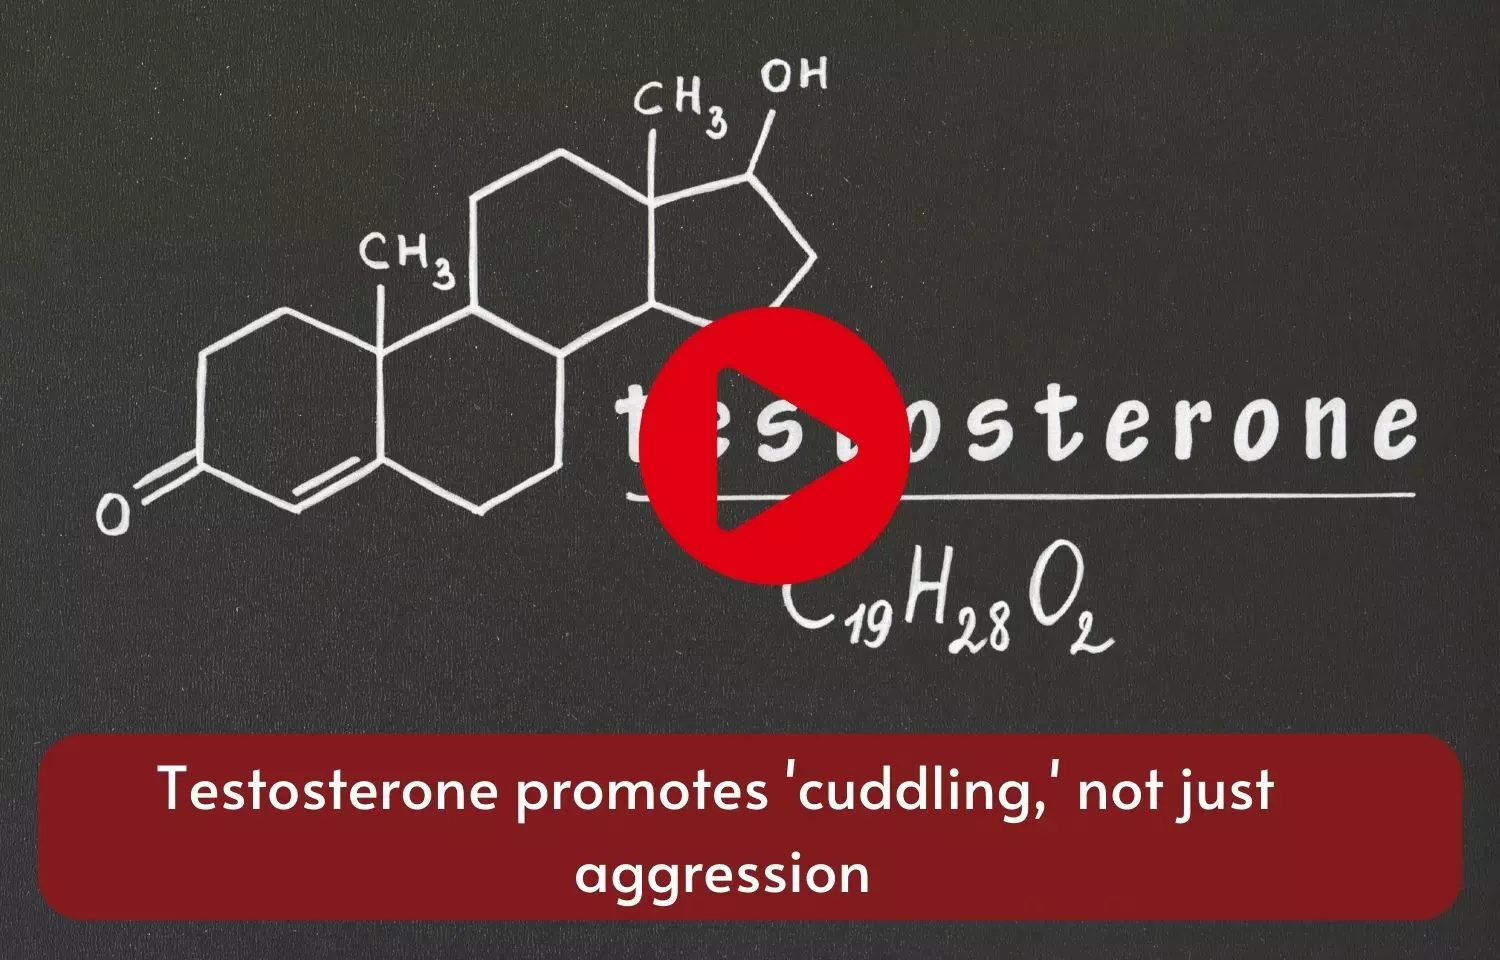 Testosterone promotes cuddling, not just aggression